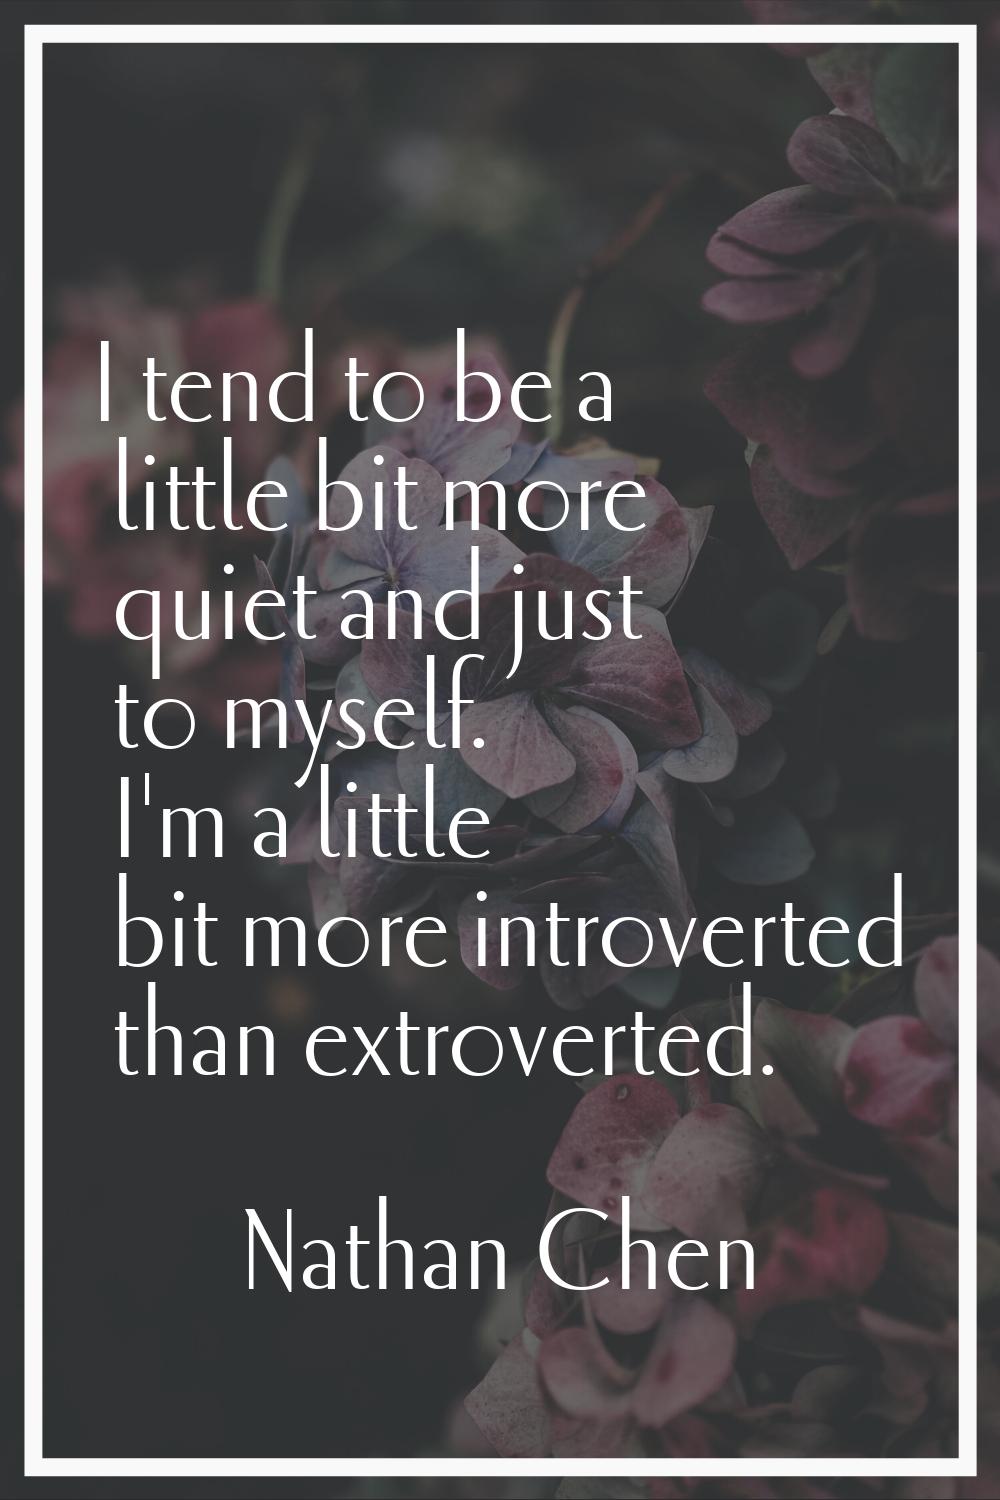 I tend to be a little bit more quiet and just to myself. I'm a little bit more introverted than ext